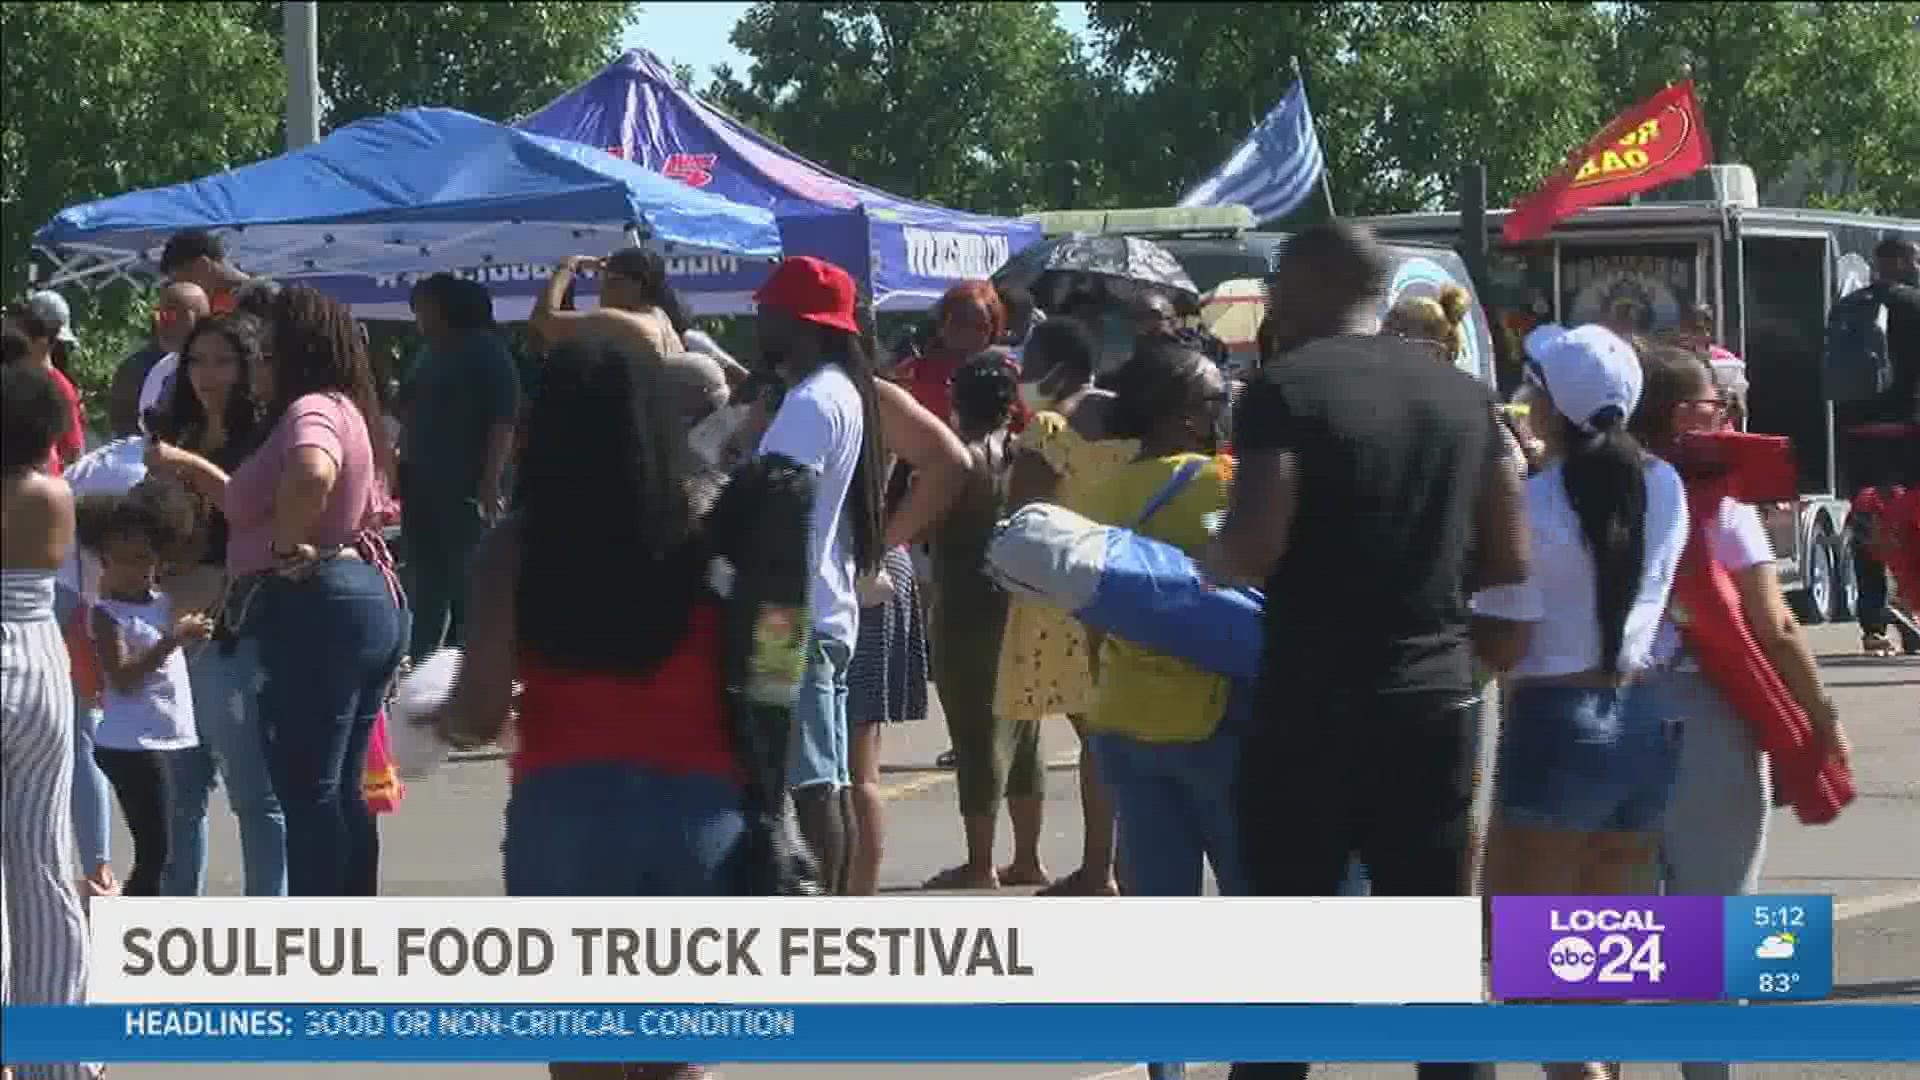 Tiger Lane held the 5th annual Soulful Food Truck Festival on Sunday.